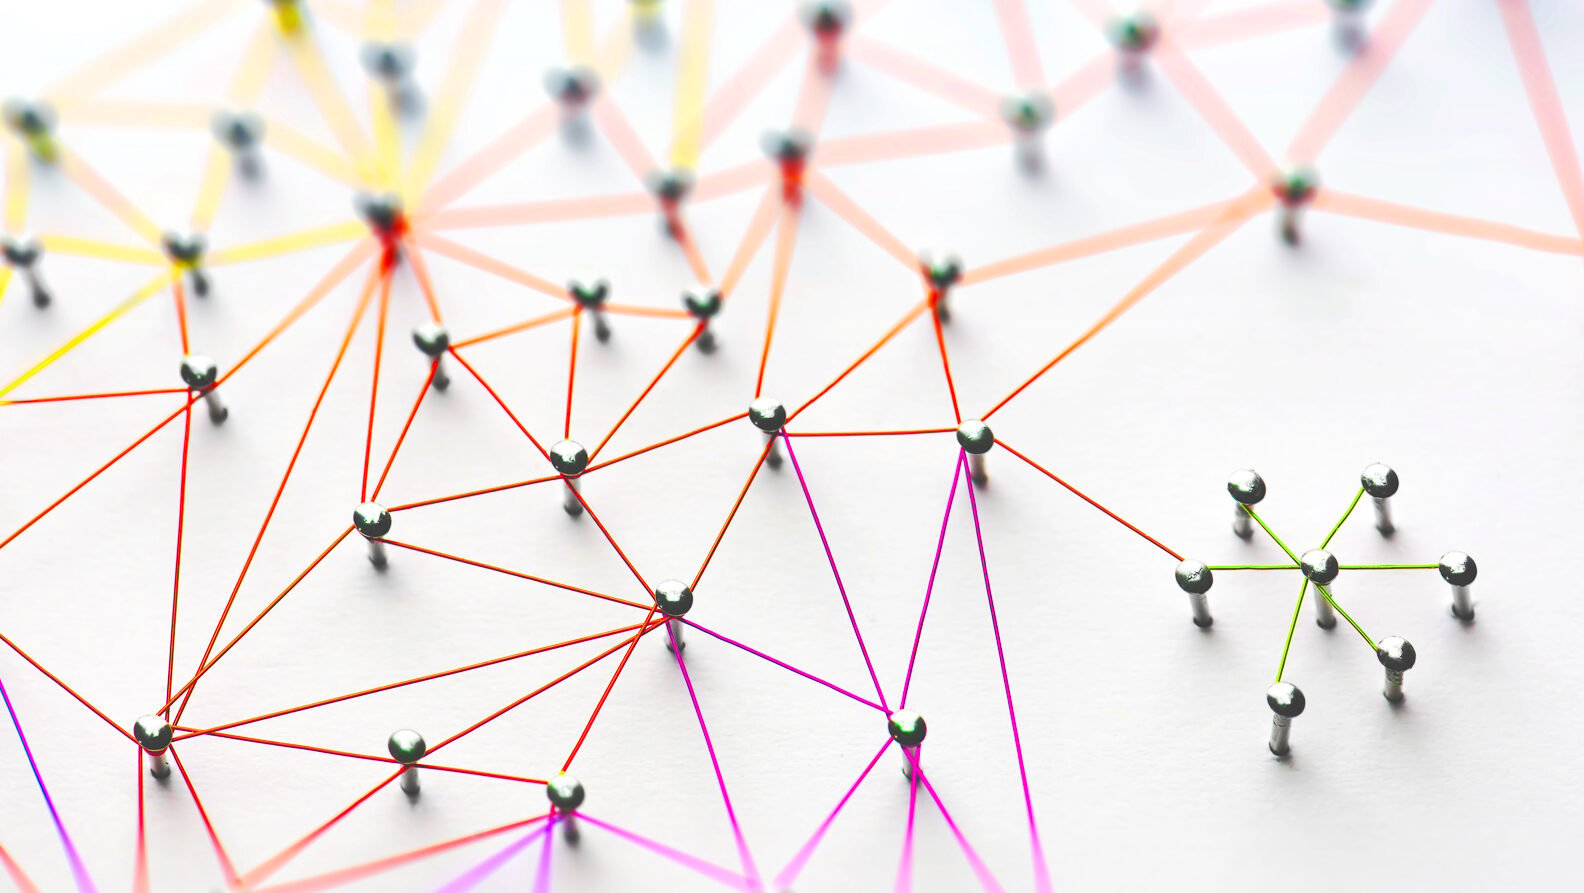 Pins connected by a web of colored string on a white background